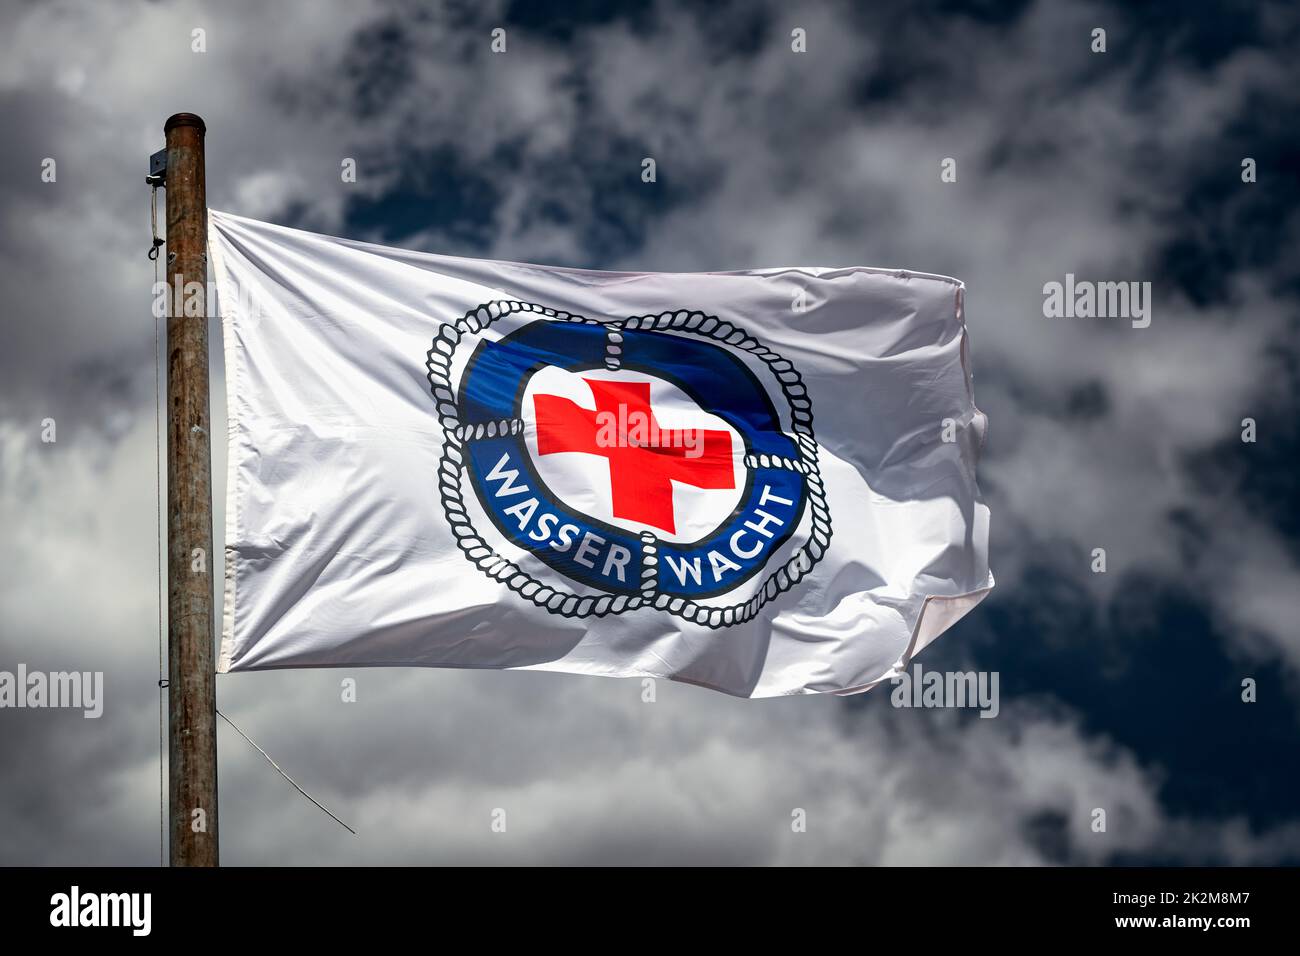 Flag of Wasserwacht, part of the German Red Cross, blowing in the wind. Stock Photo